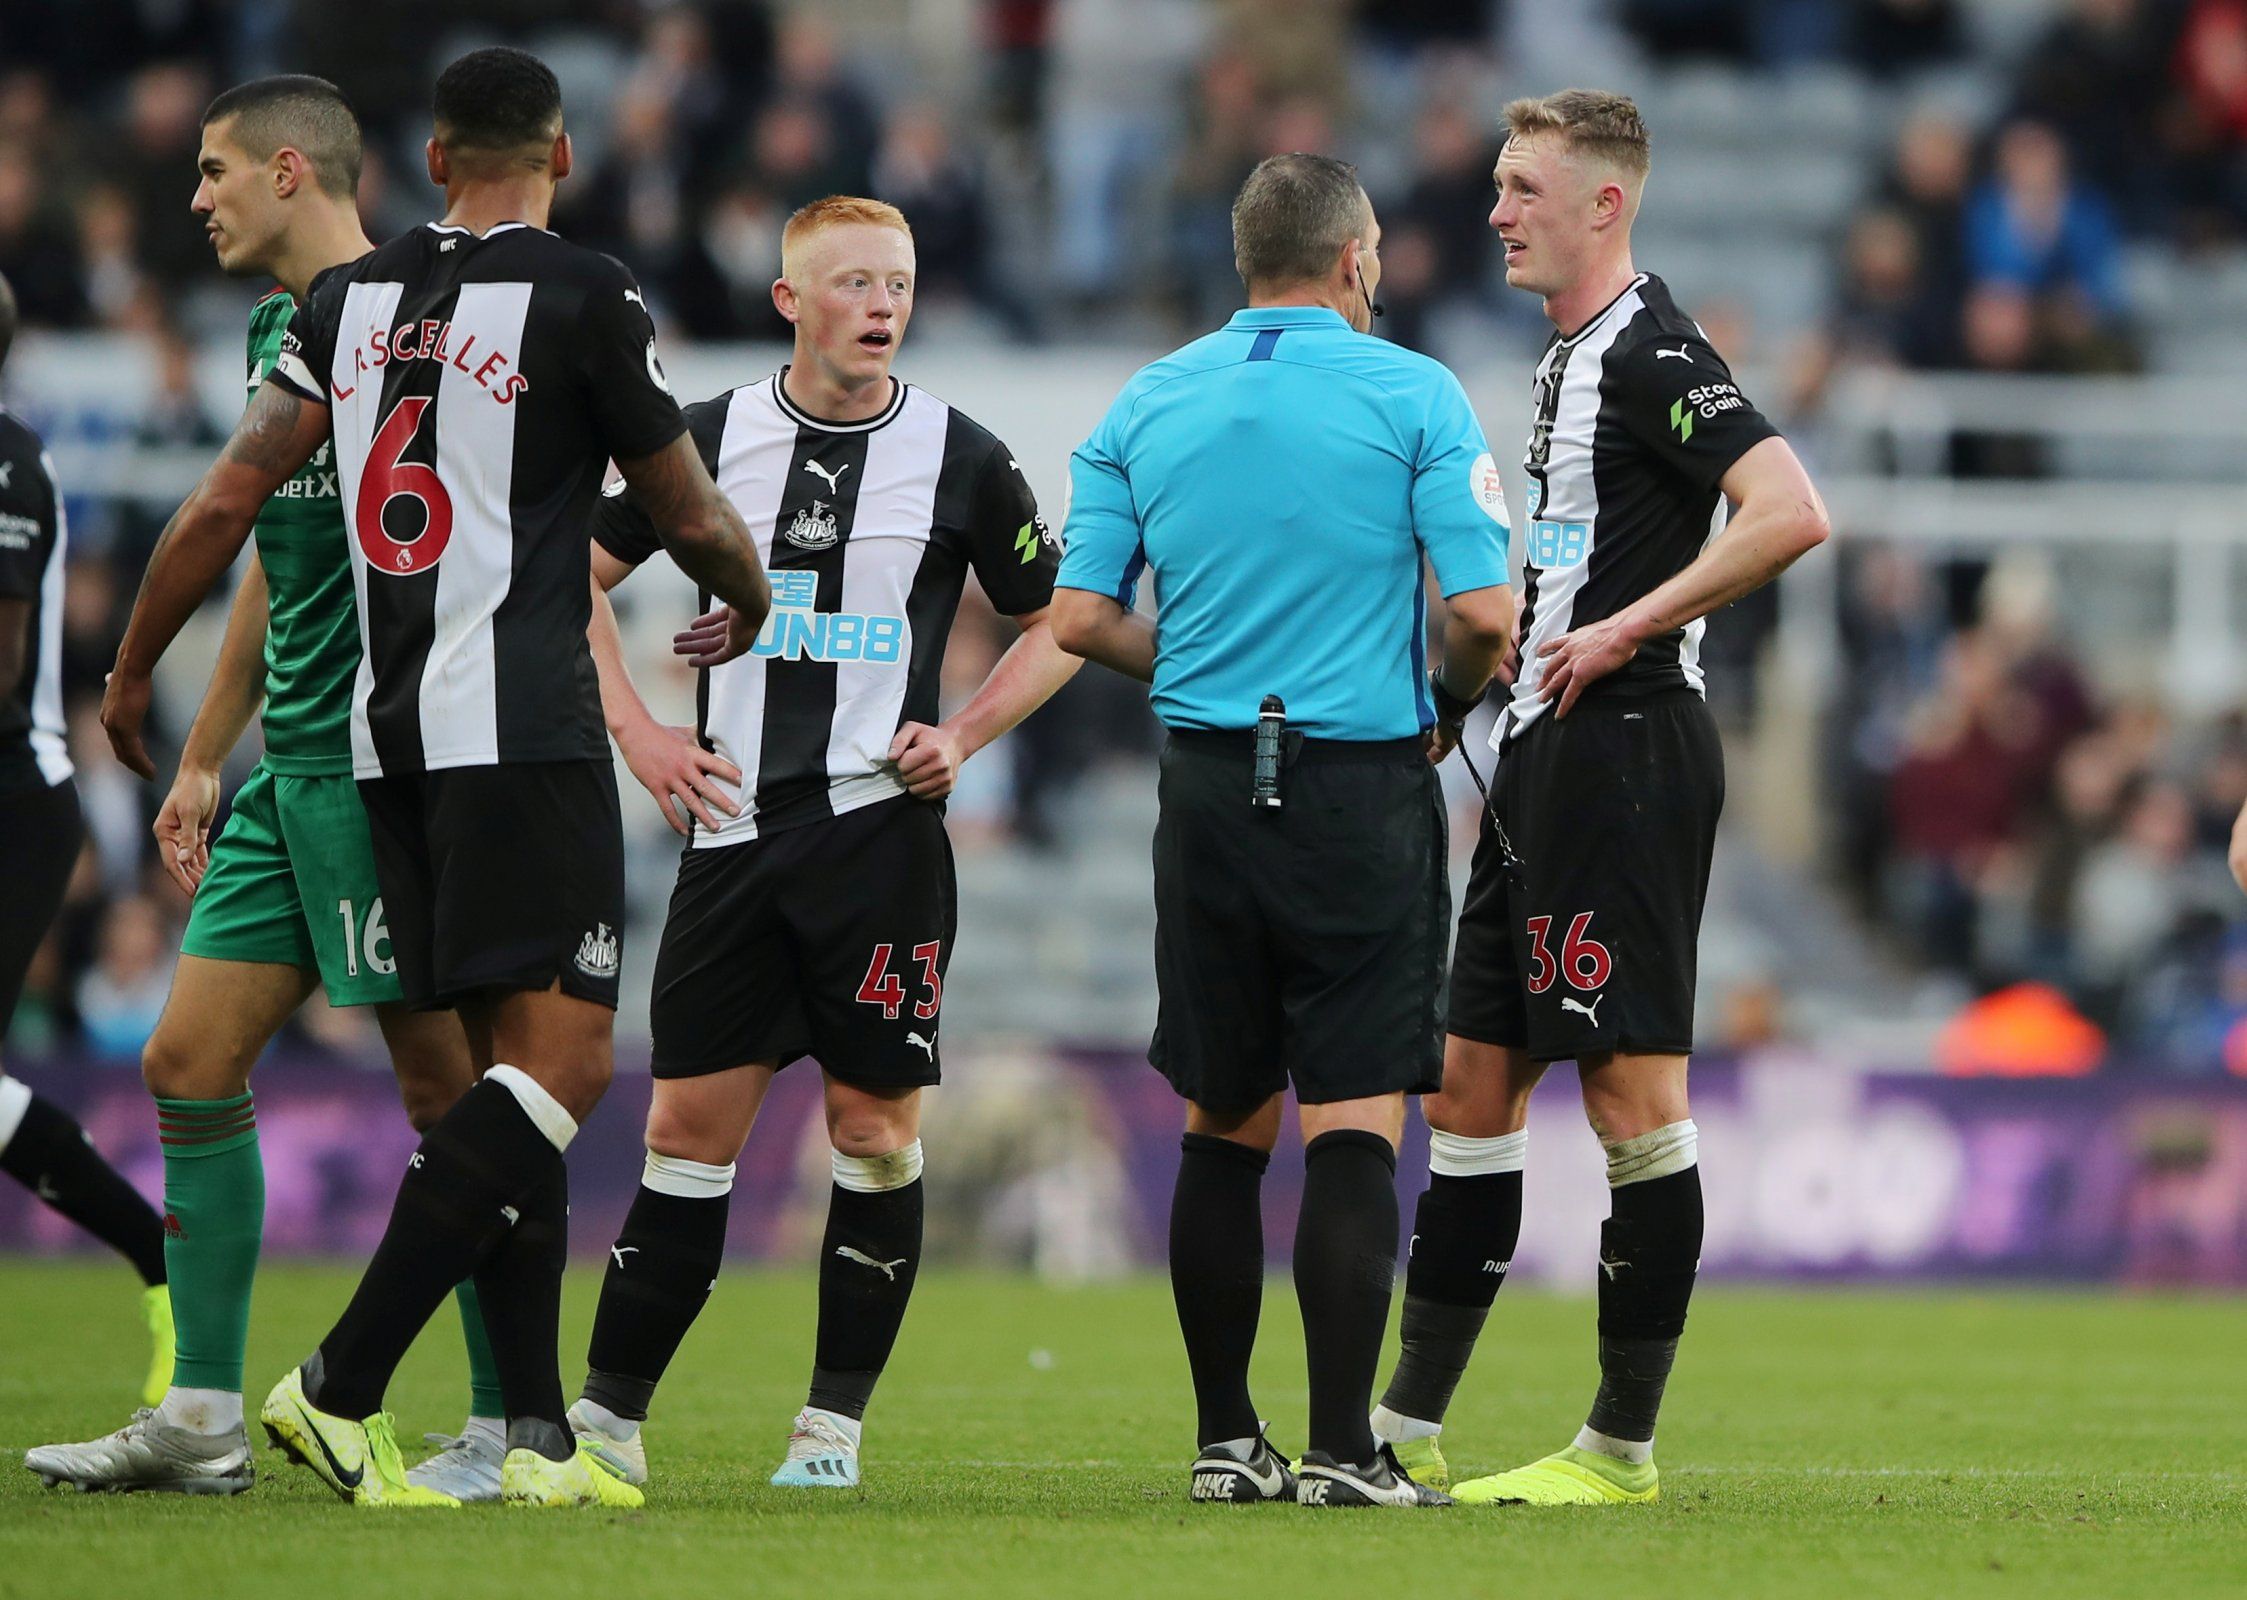 Newcastle United's Sean Longstaff is shown a red card by referee Kevin Friend after fouling Wolverhampton Wanderers' Ruben Neves